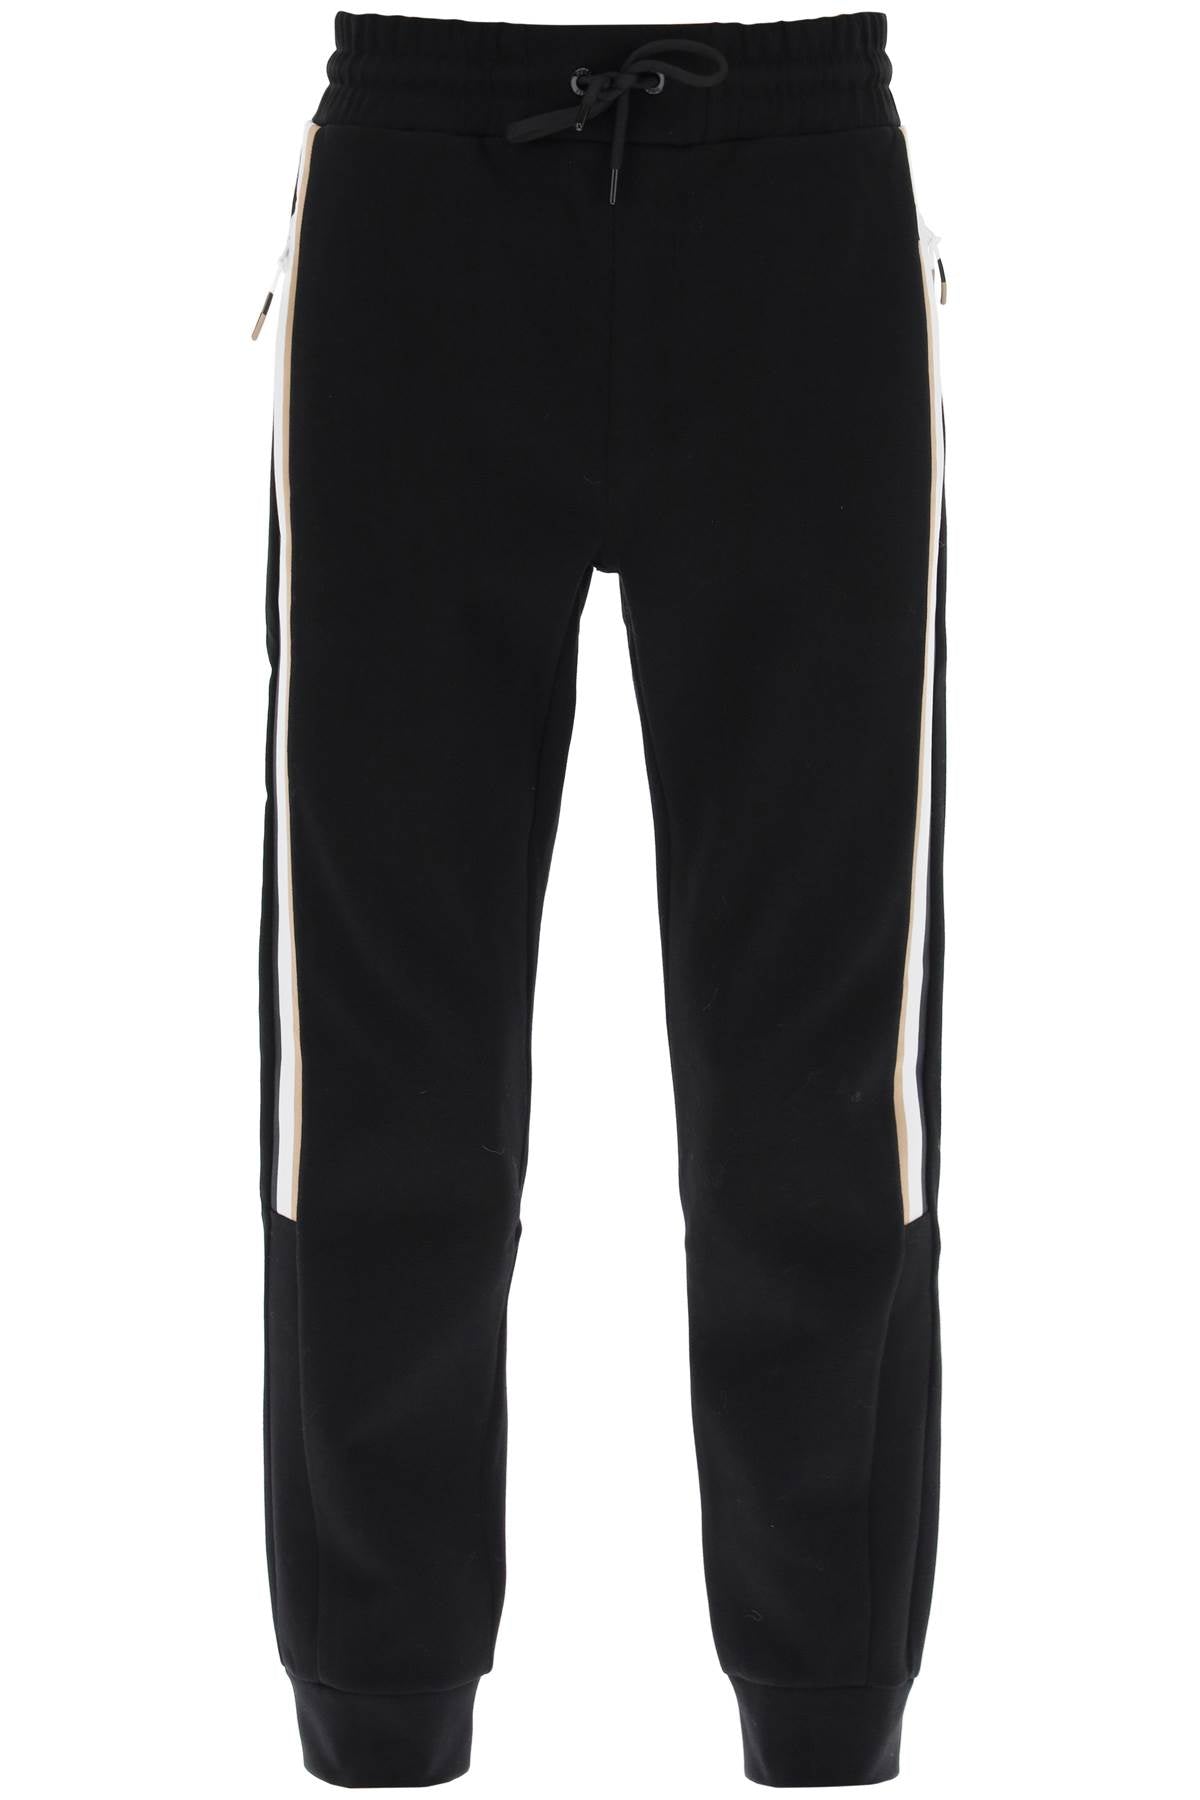 HUGO BOSS JOGGERS WITH TWO TONE SIDE BANDS